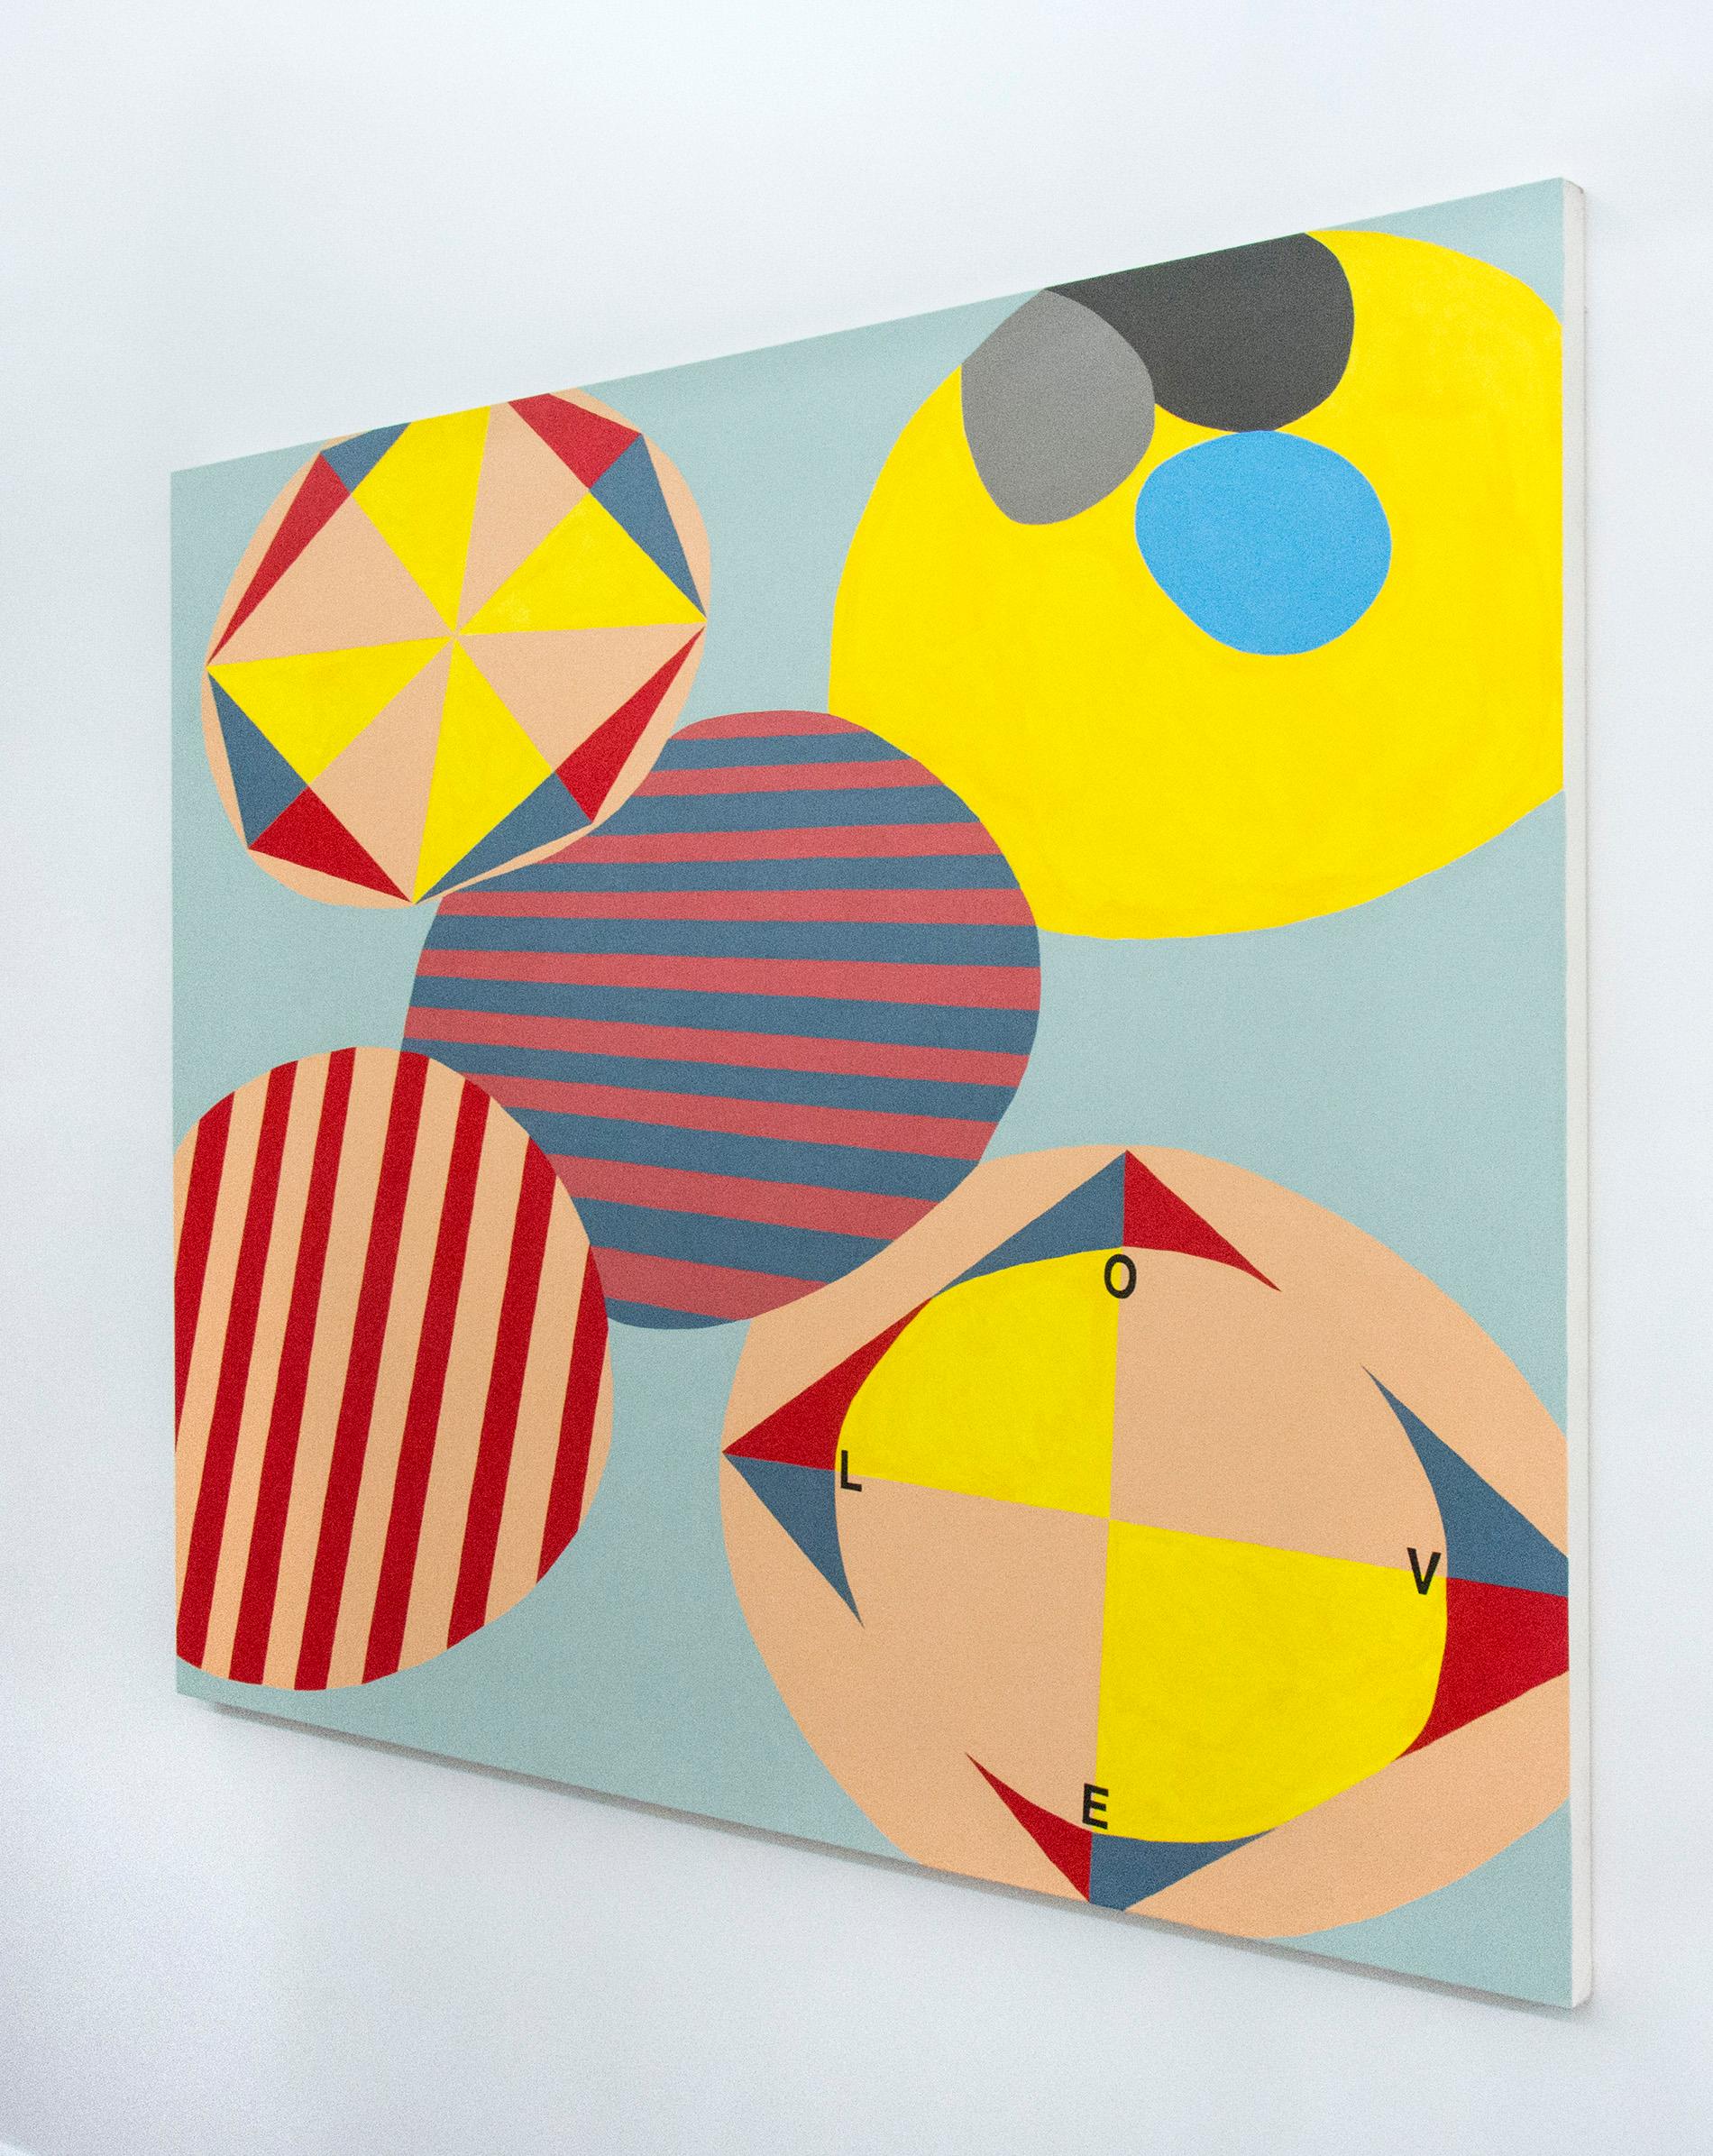 Room for Mystics 1 - Abstract oval shapes in peach, red, yellow and blue  - Painting by Sandra Meigs